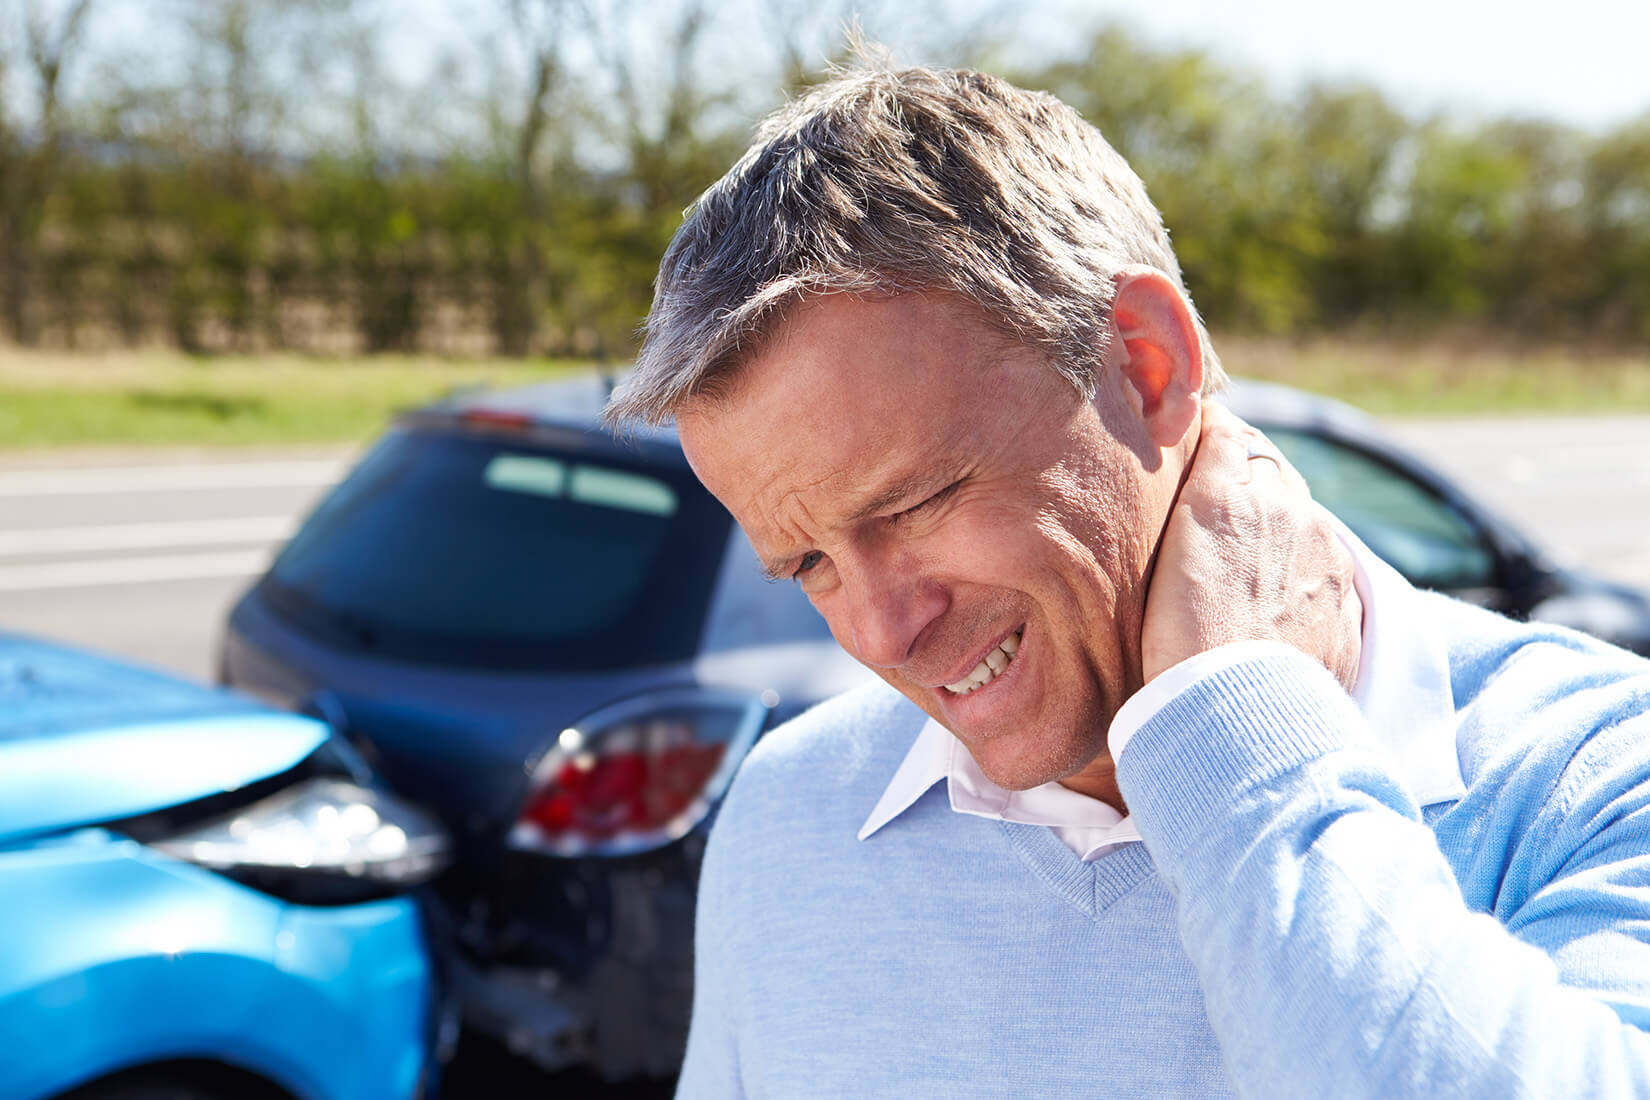 car accident injury chiropractic care